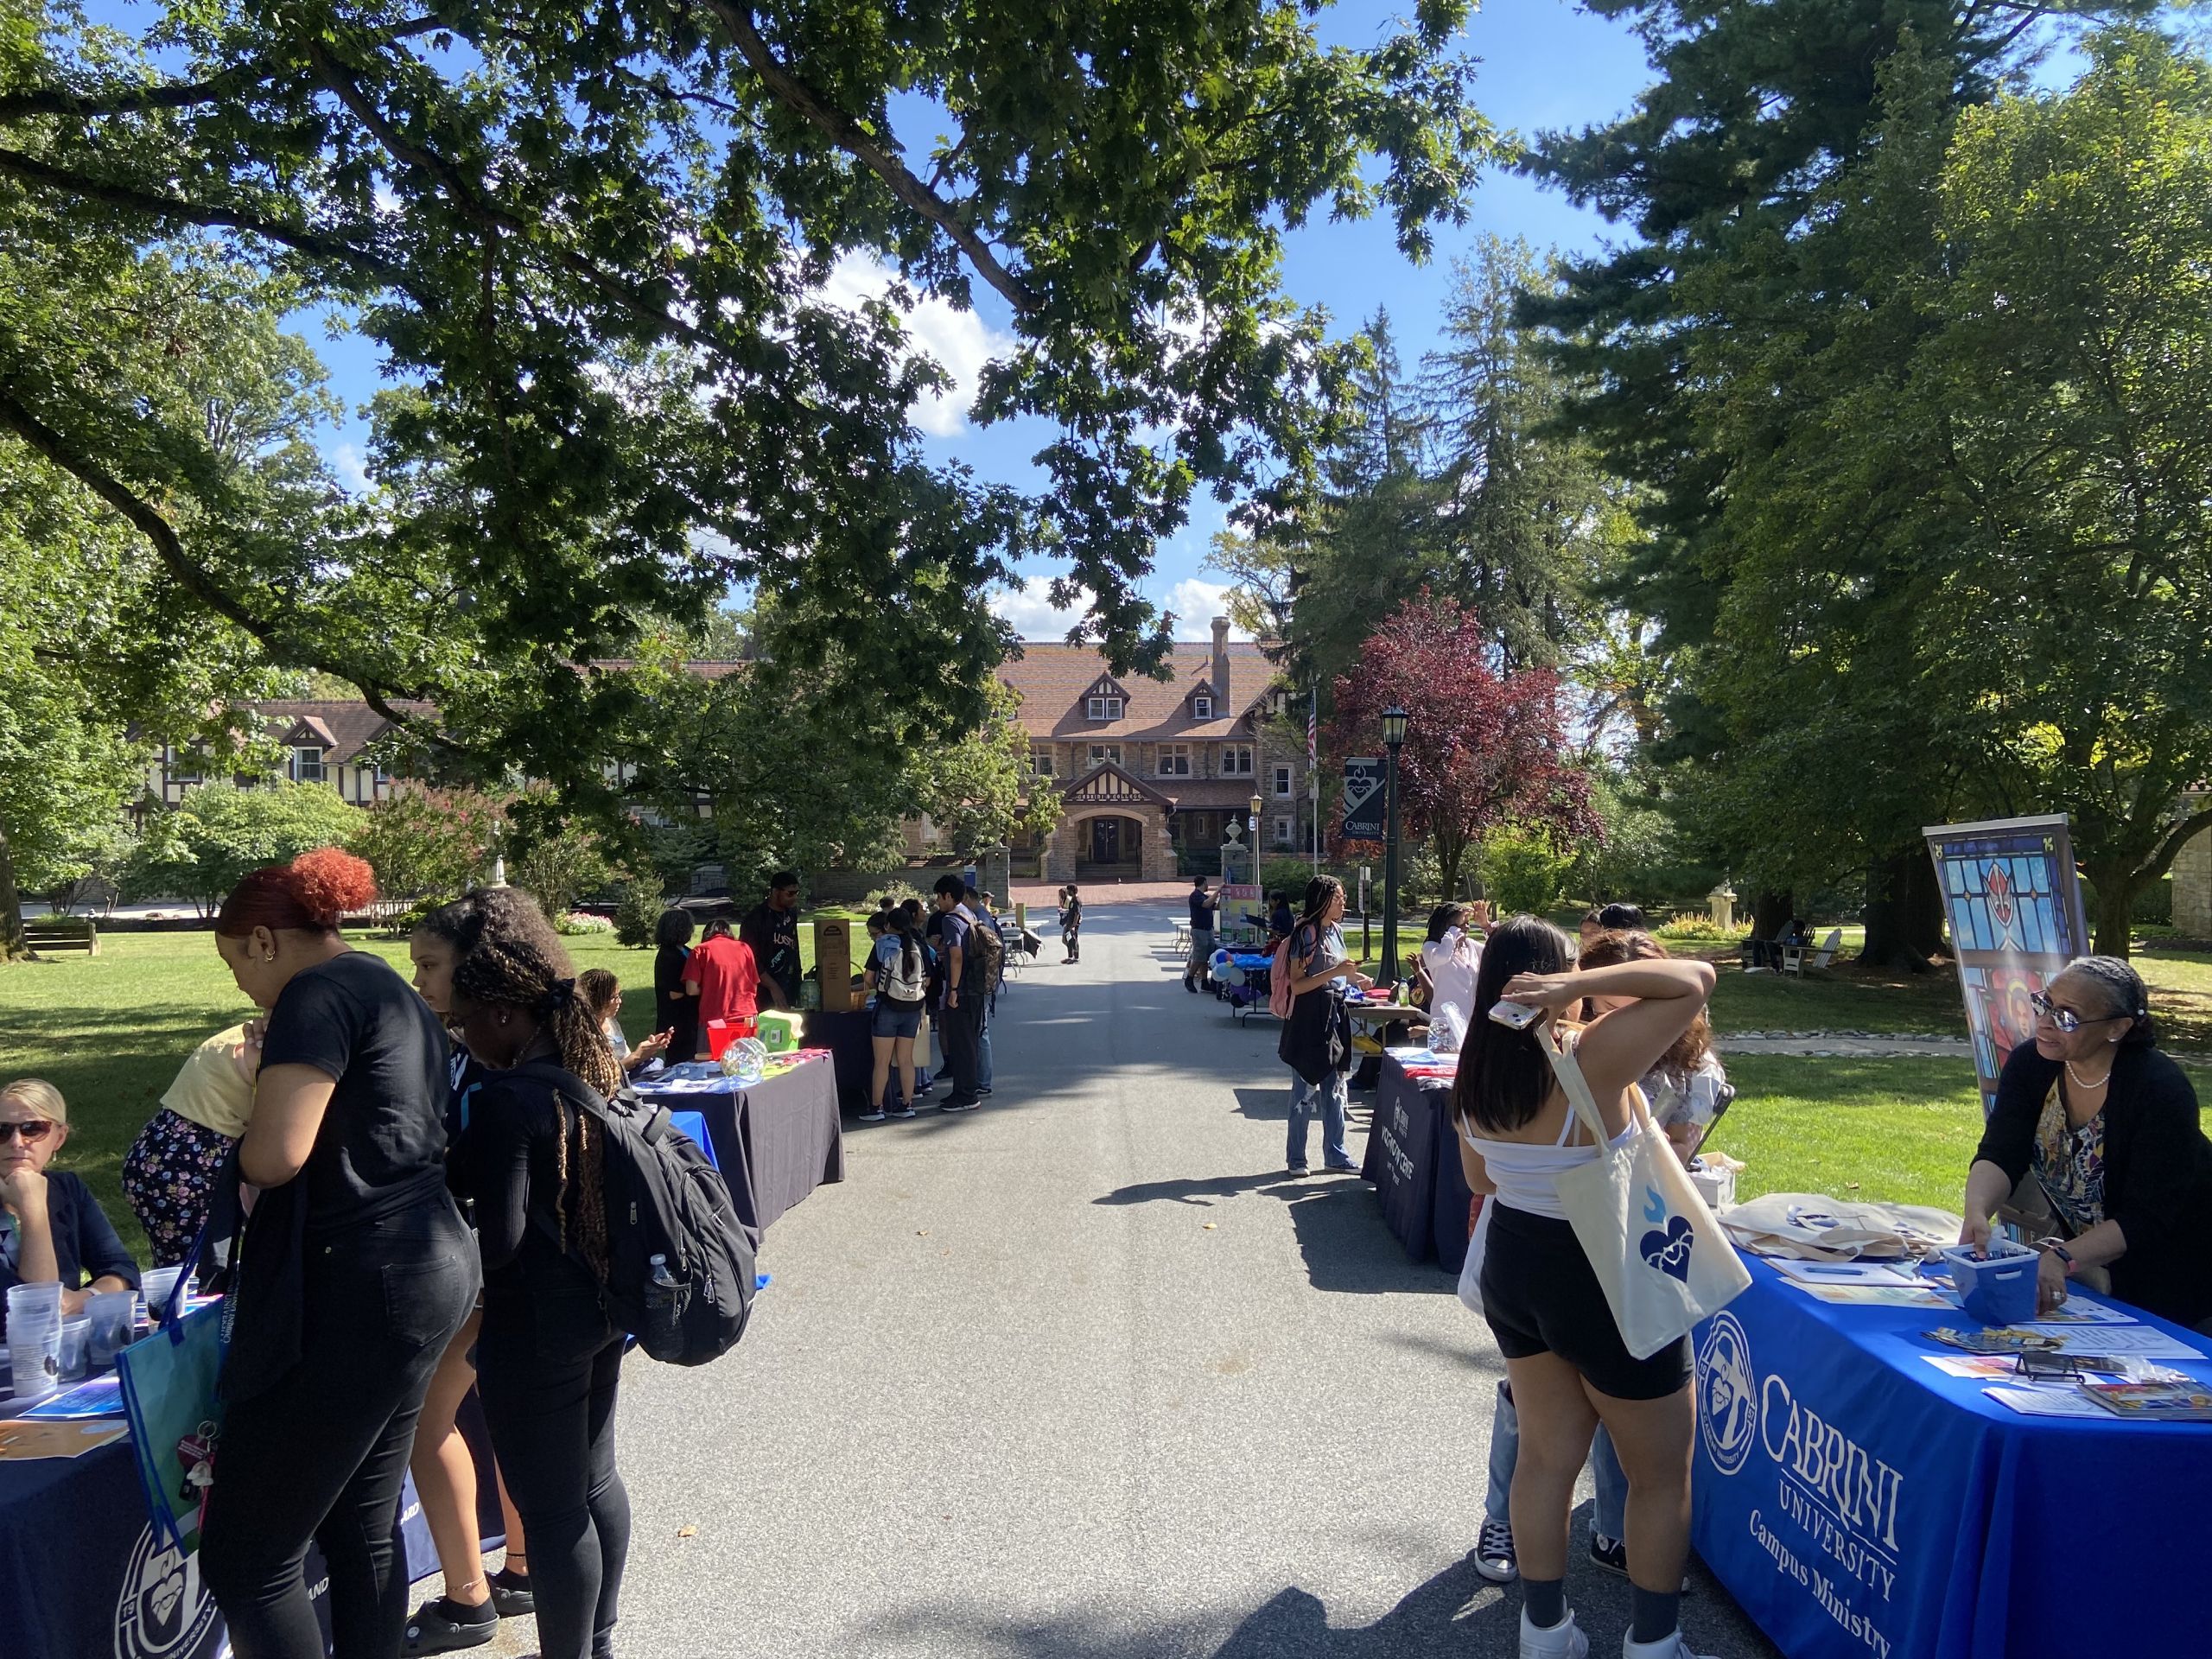 The Involvement fair in full swing with people filling the tables to sign up for clubs. Photo by Savana Harrison 